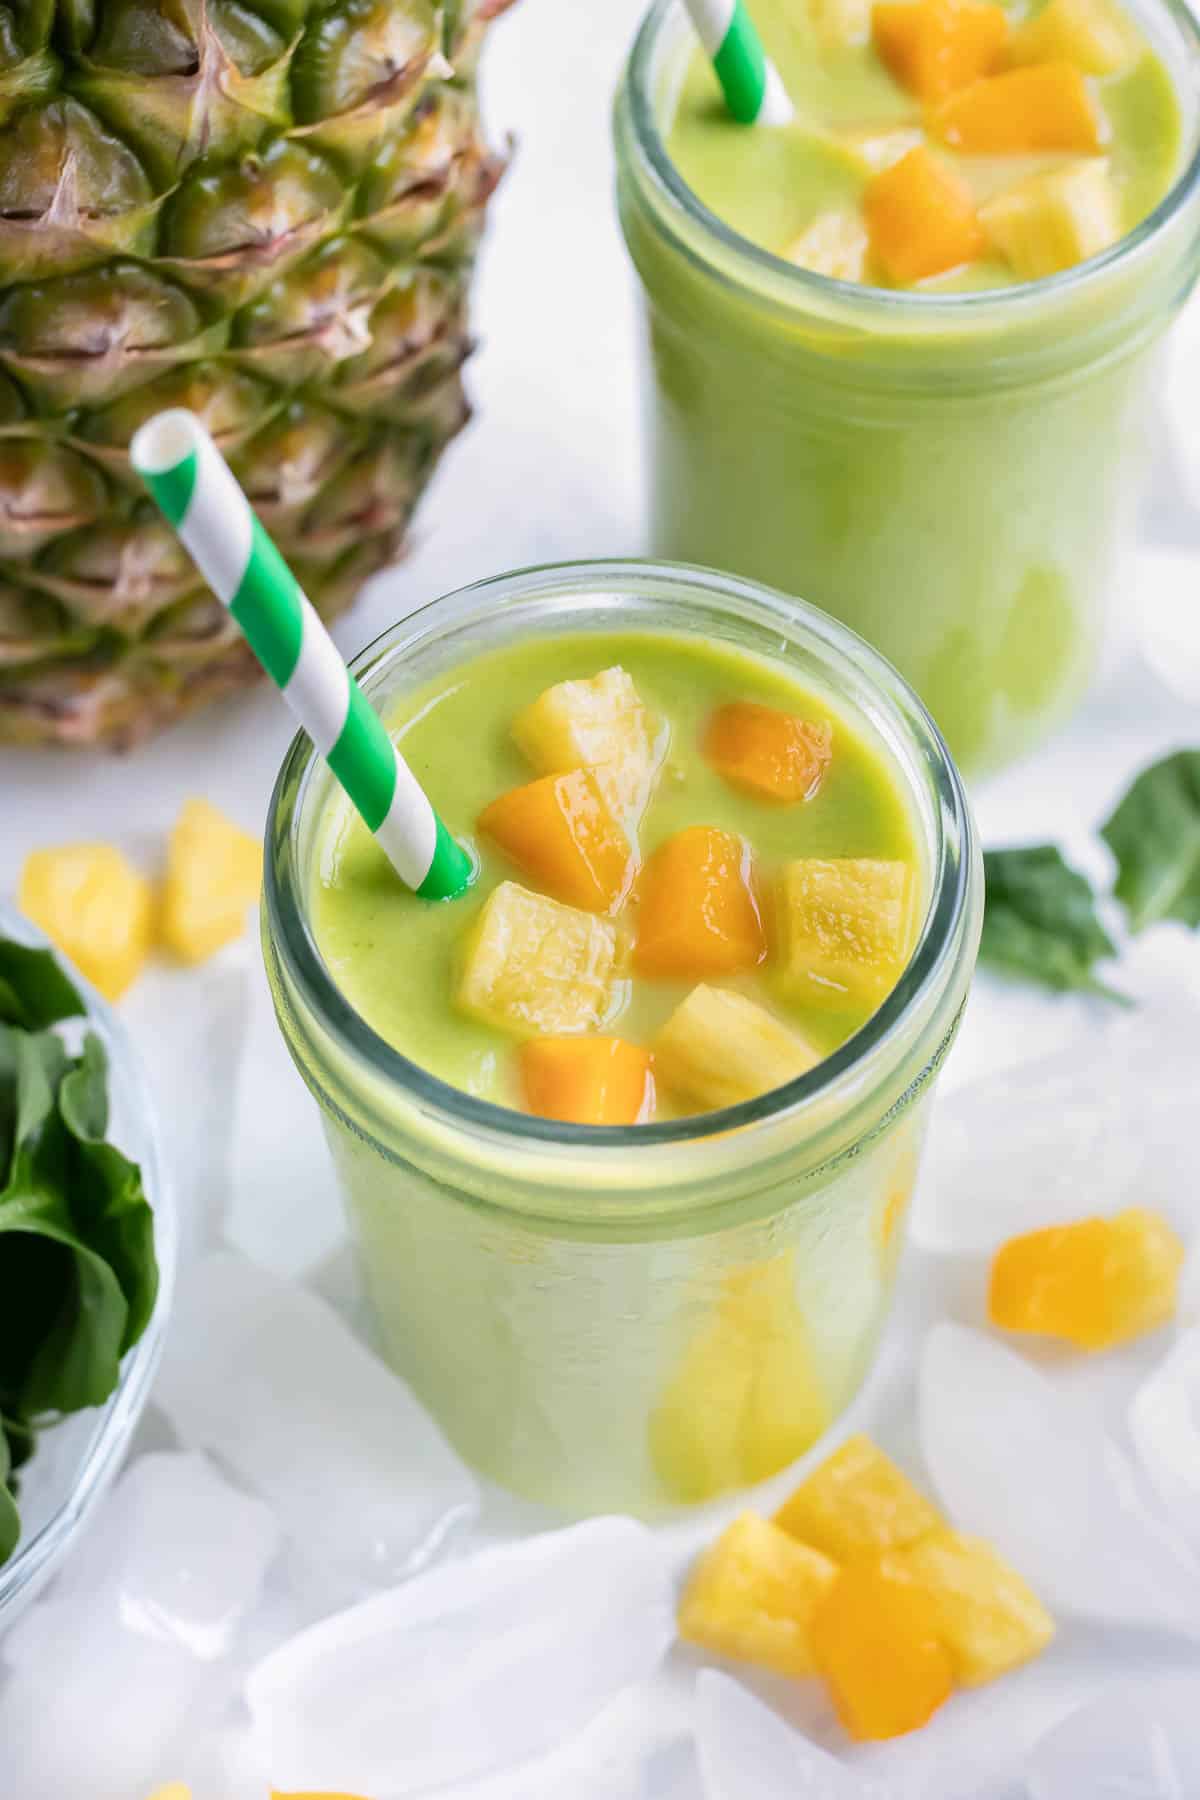 Tropical green smoothies are served in a glass with a straw for breakfast.